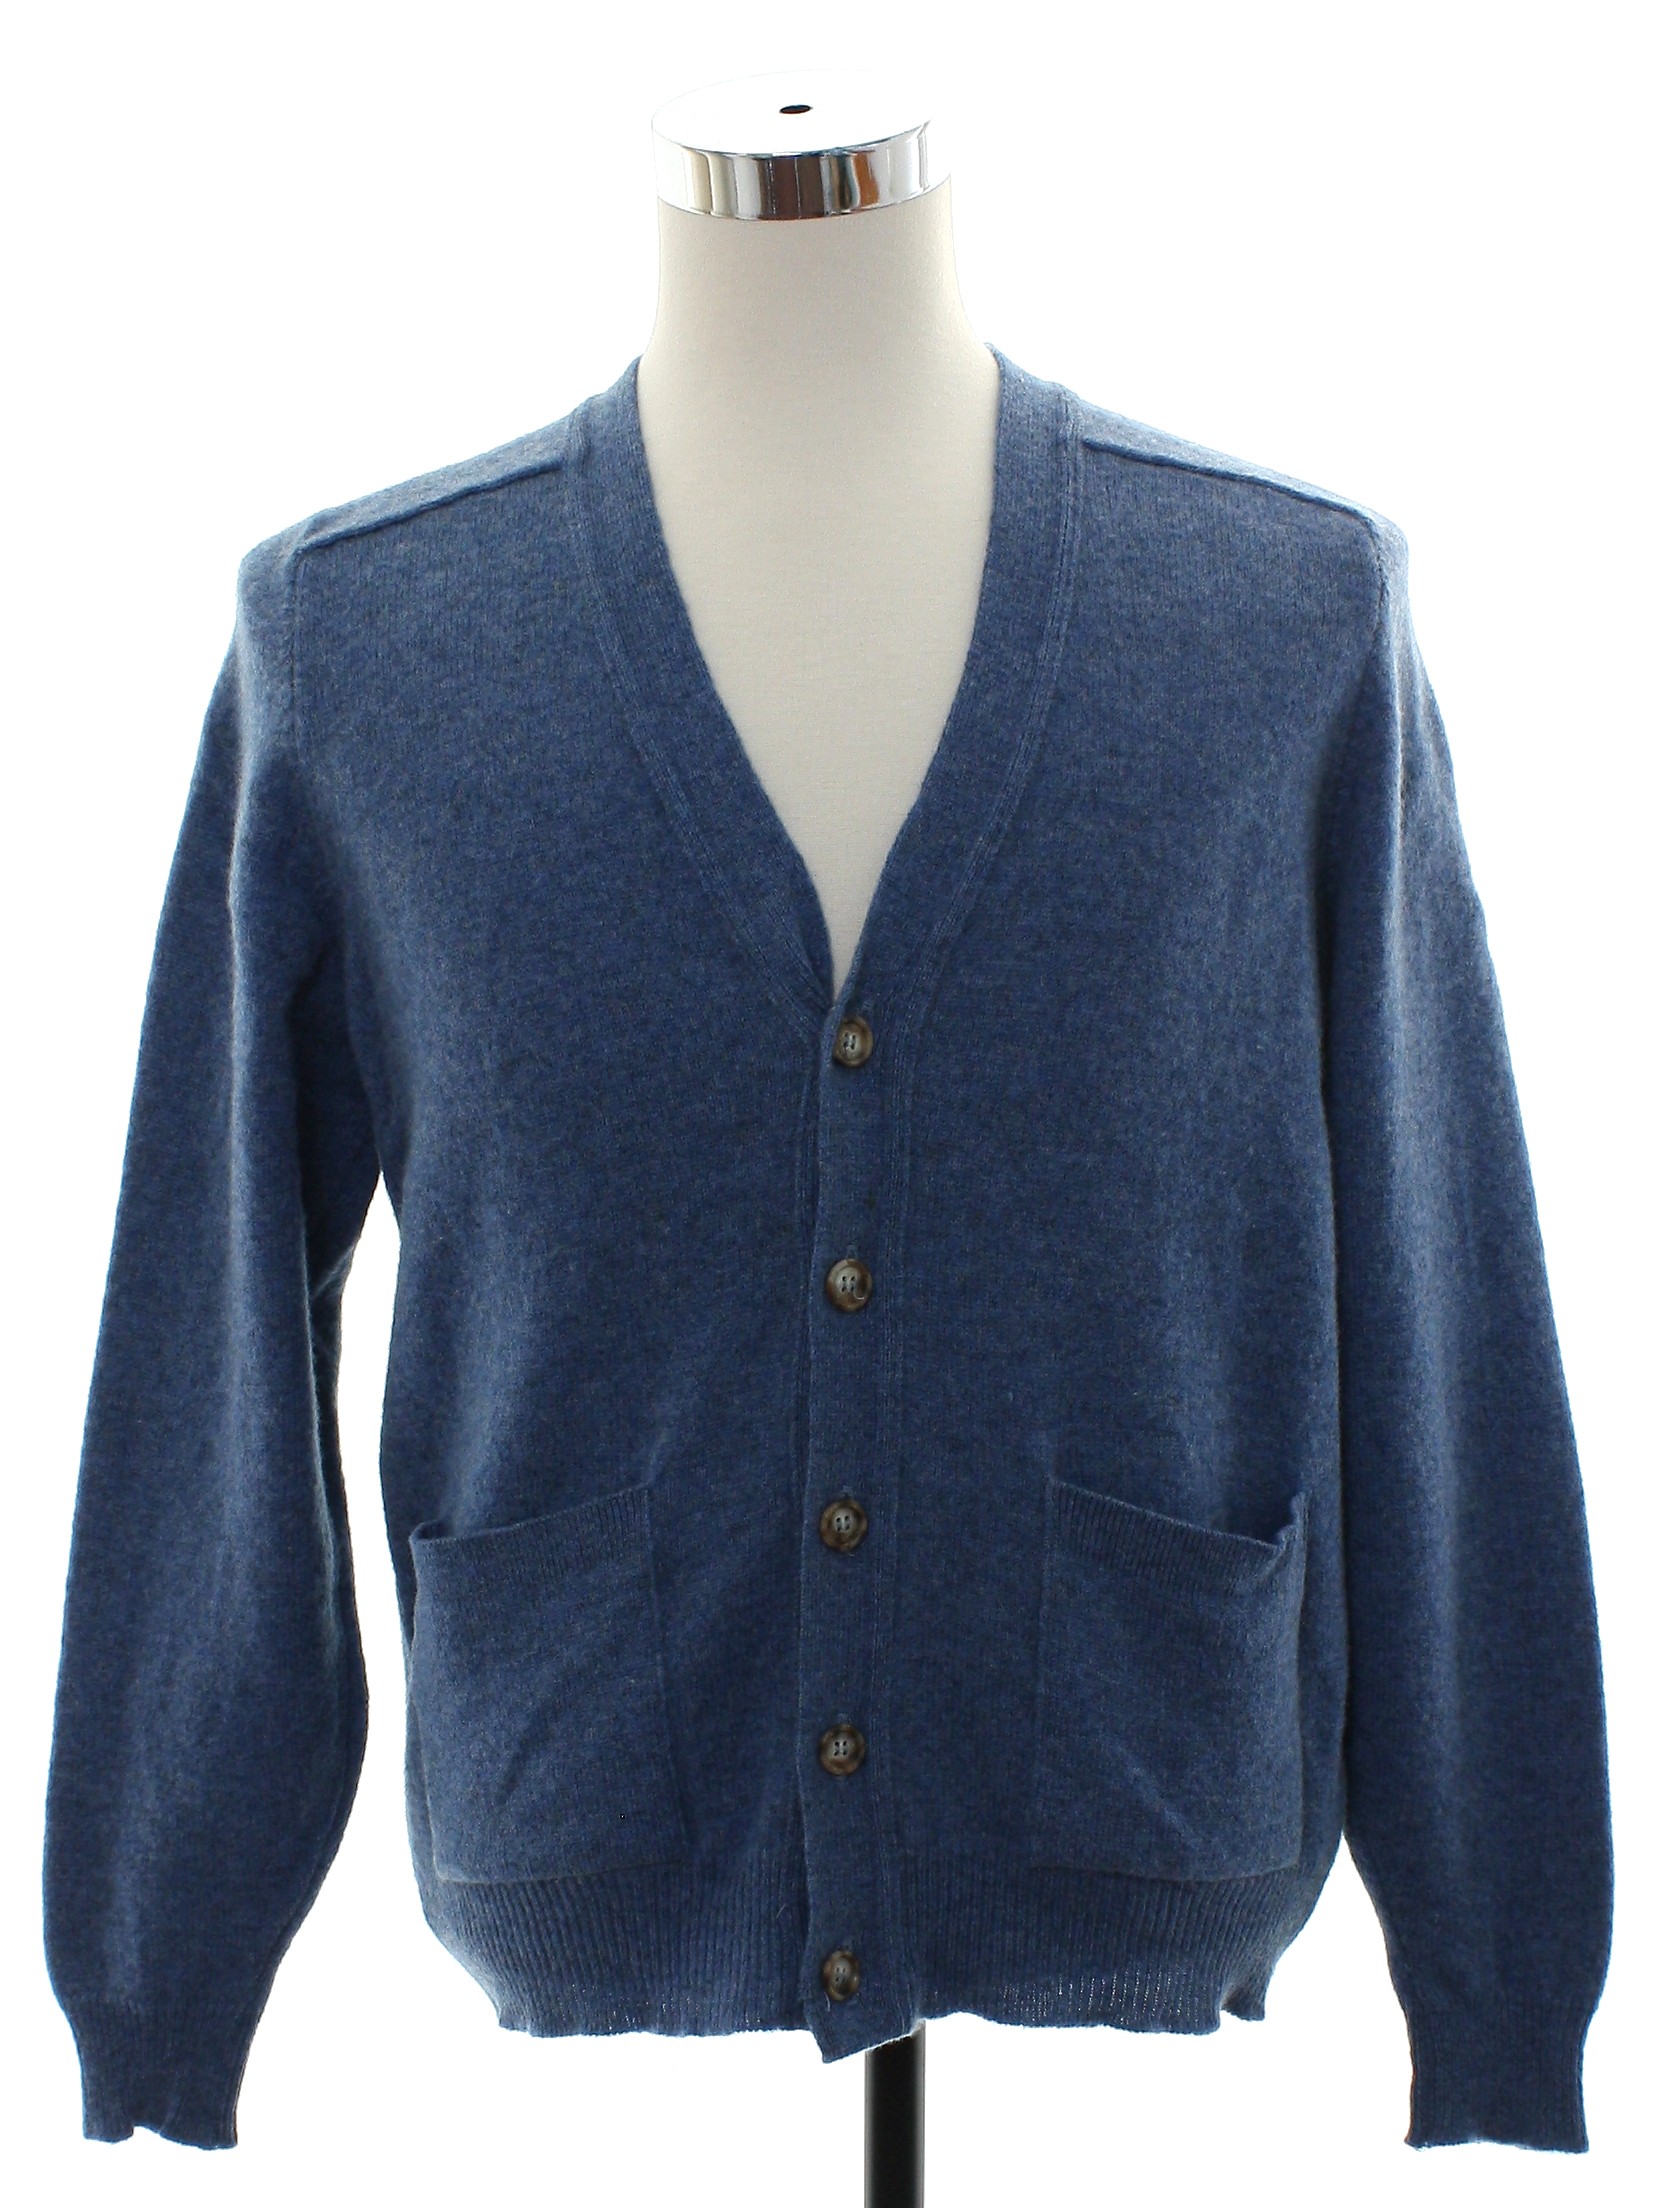 70s Caridgan Sweater: Late 70s or Early 80s -Pendleton Woolen Mills ...